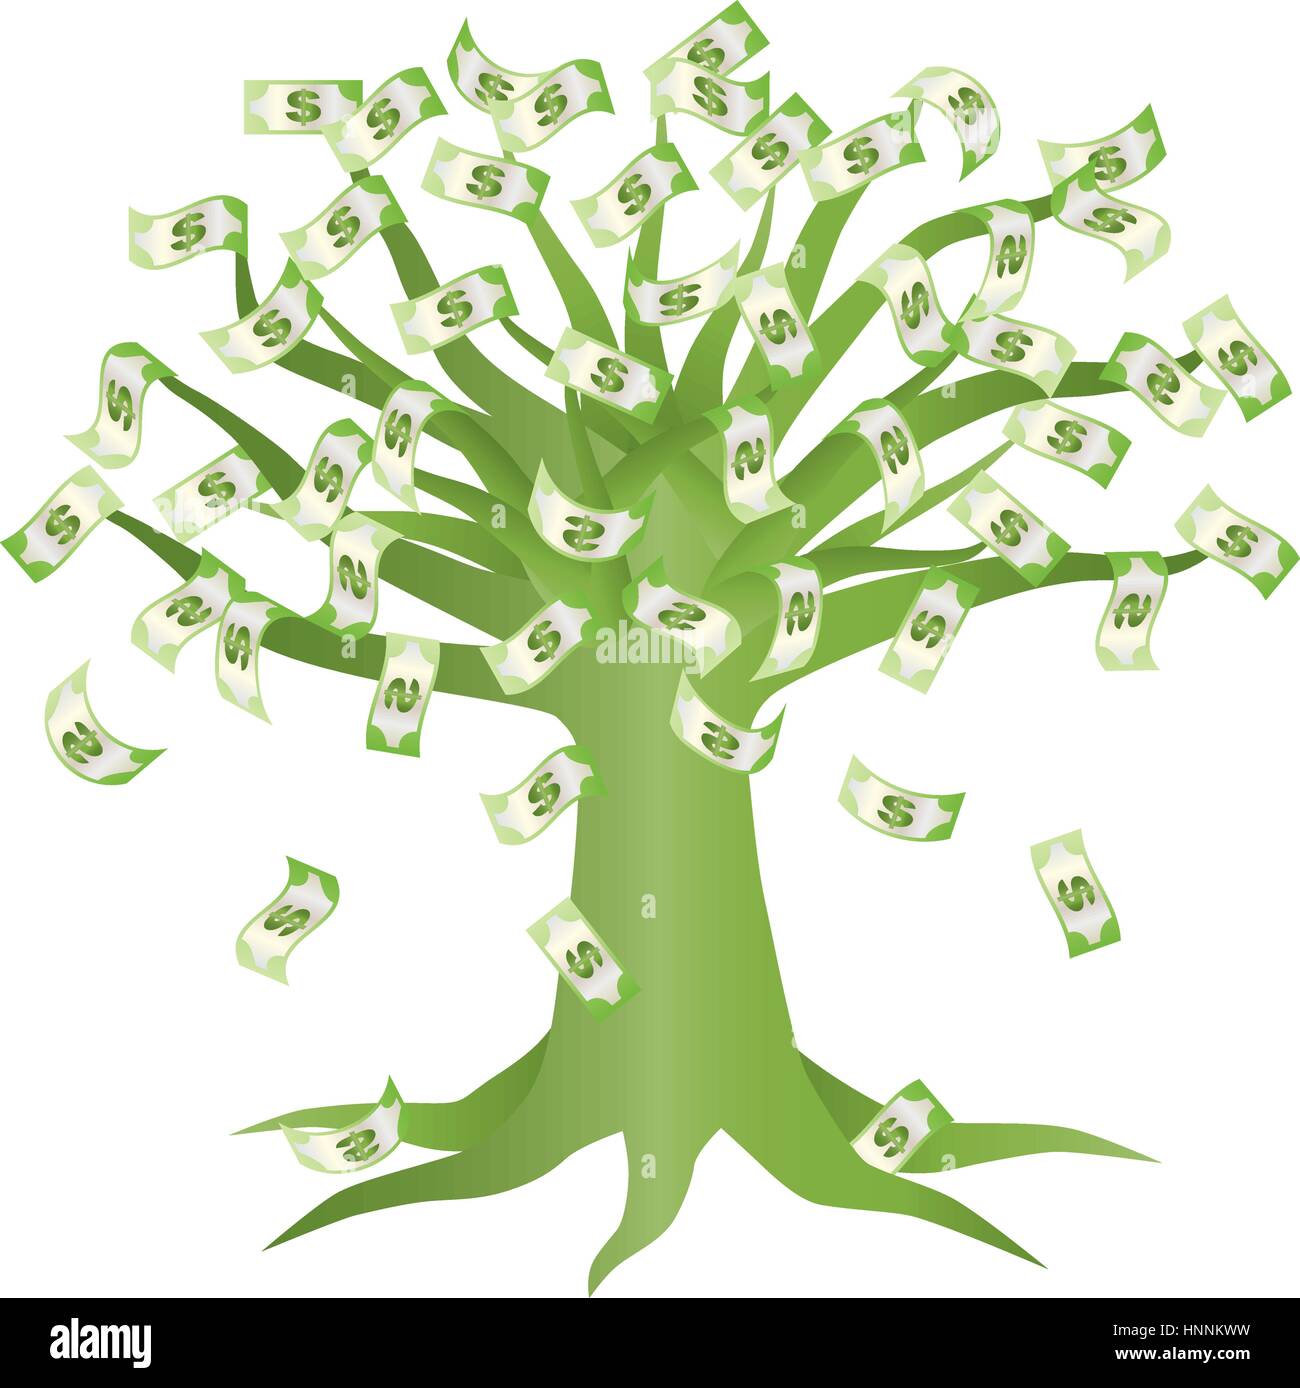 Money Growing on Green Tree Illustration Isolated on White Background Stock Vector